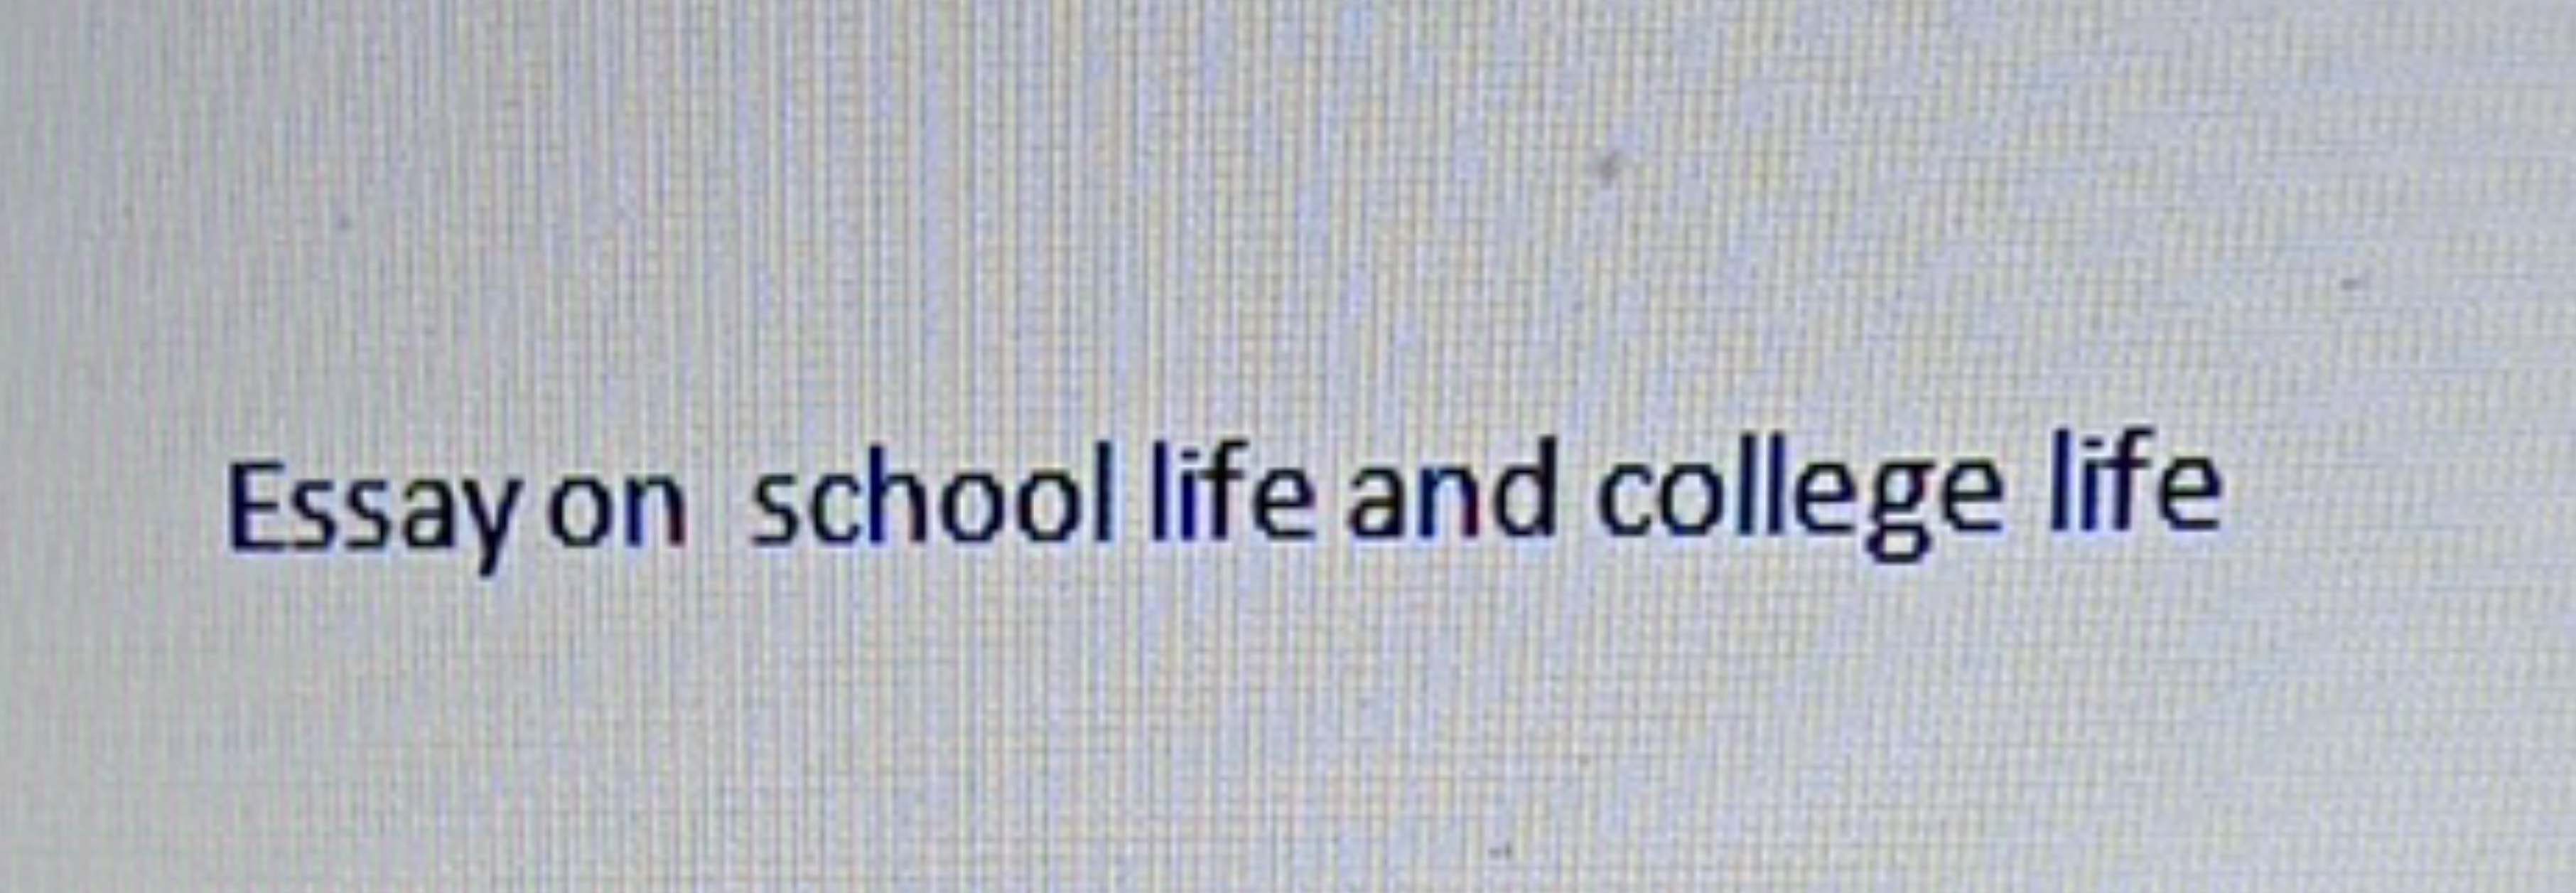 Essay on school life and college life